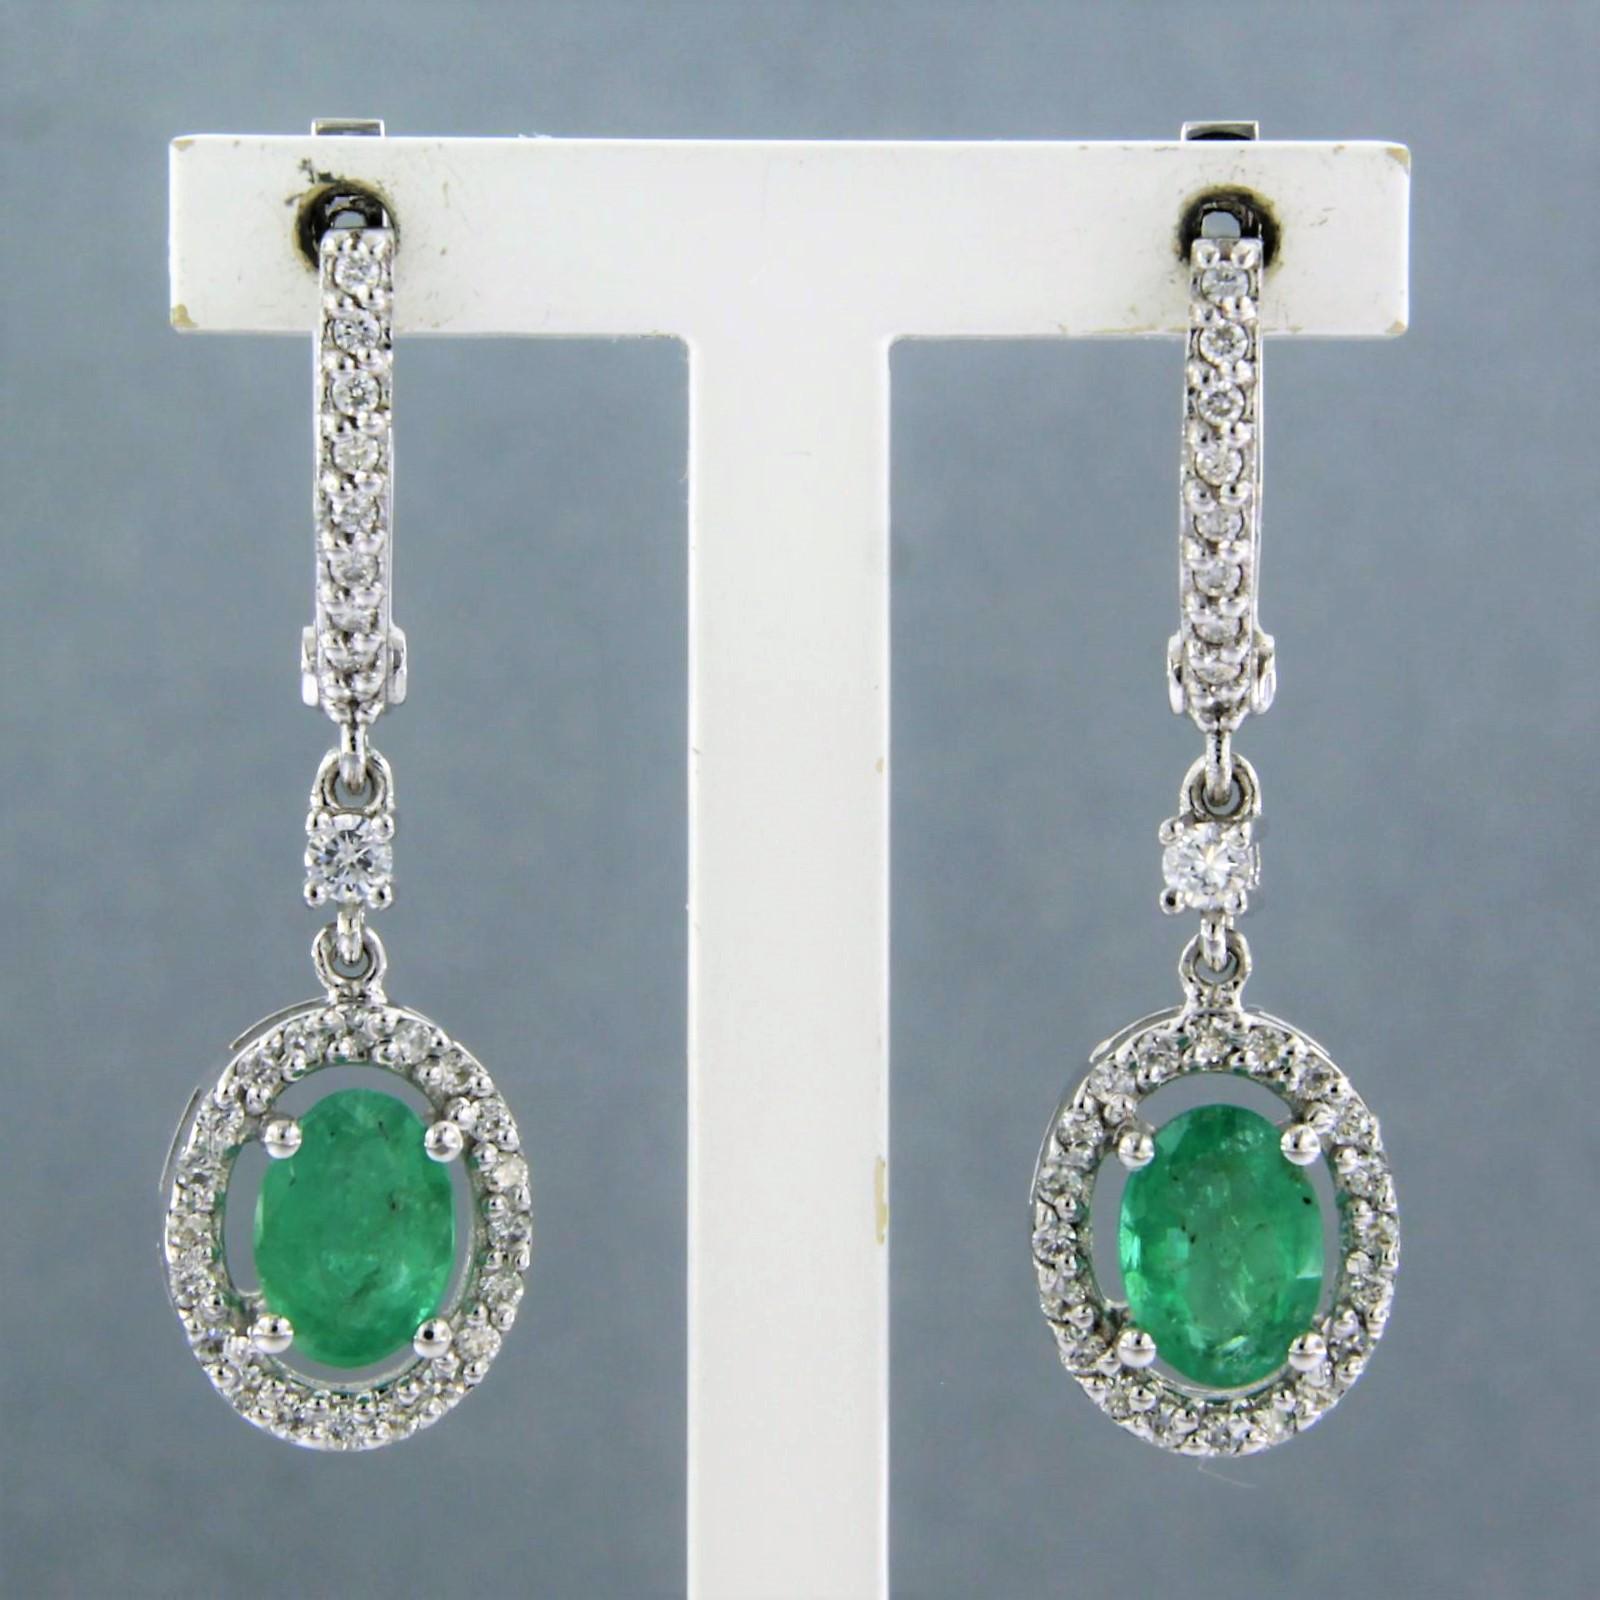 14k white gold earrings set with emerald. 1.40ct and brilliant cut diamonds up to. 0.41 ct - F/G - VS/SI

detailed description:

the size of the earring is 2.6 cm high and 9.1 mm wide

weight: 4.9 grams

occupied with

- 2 x 7.0 mm x 5.0 mm oval